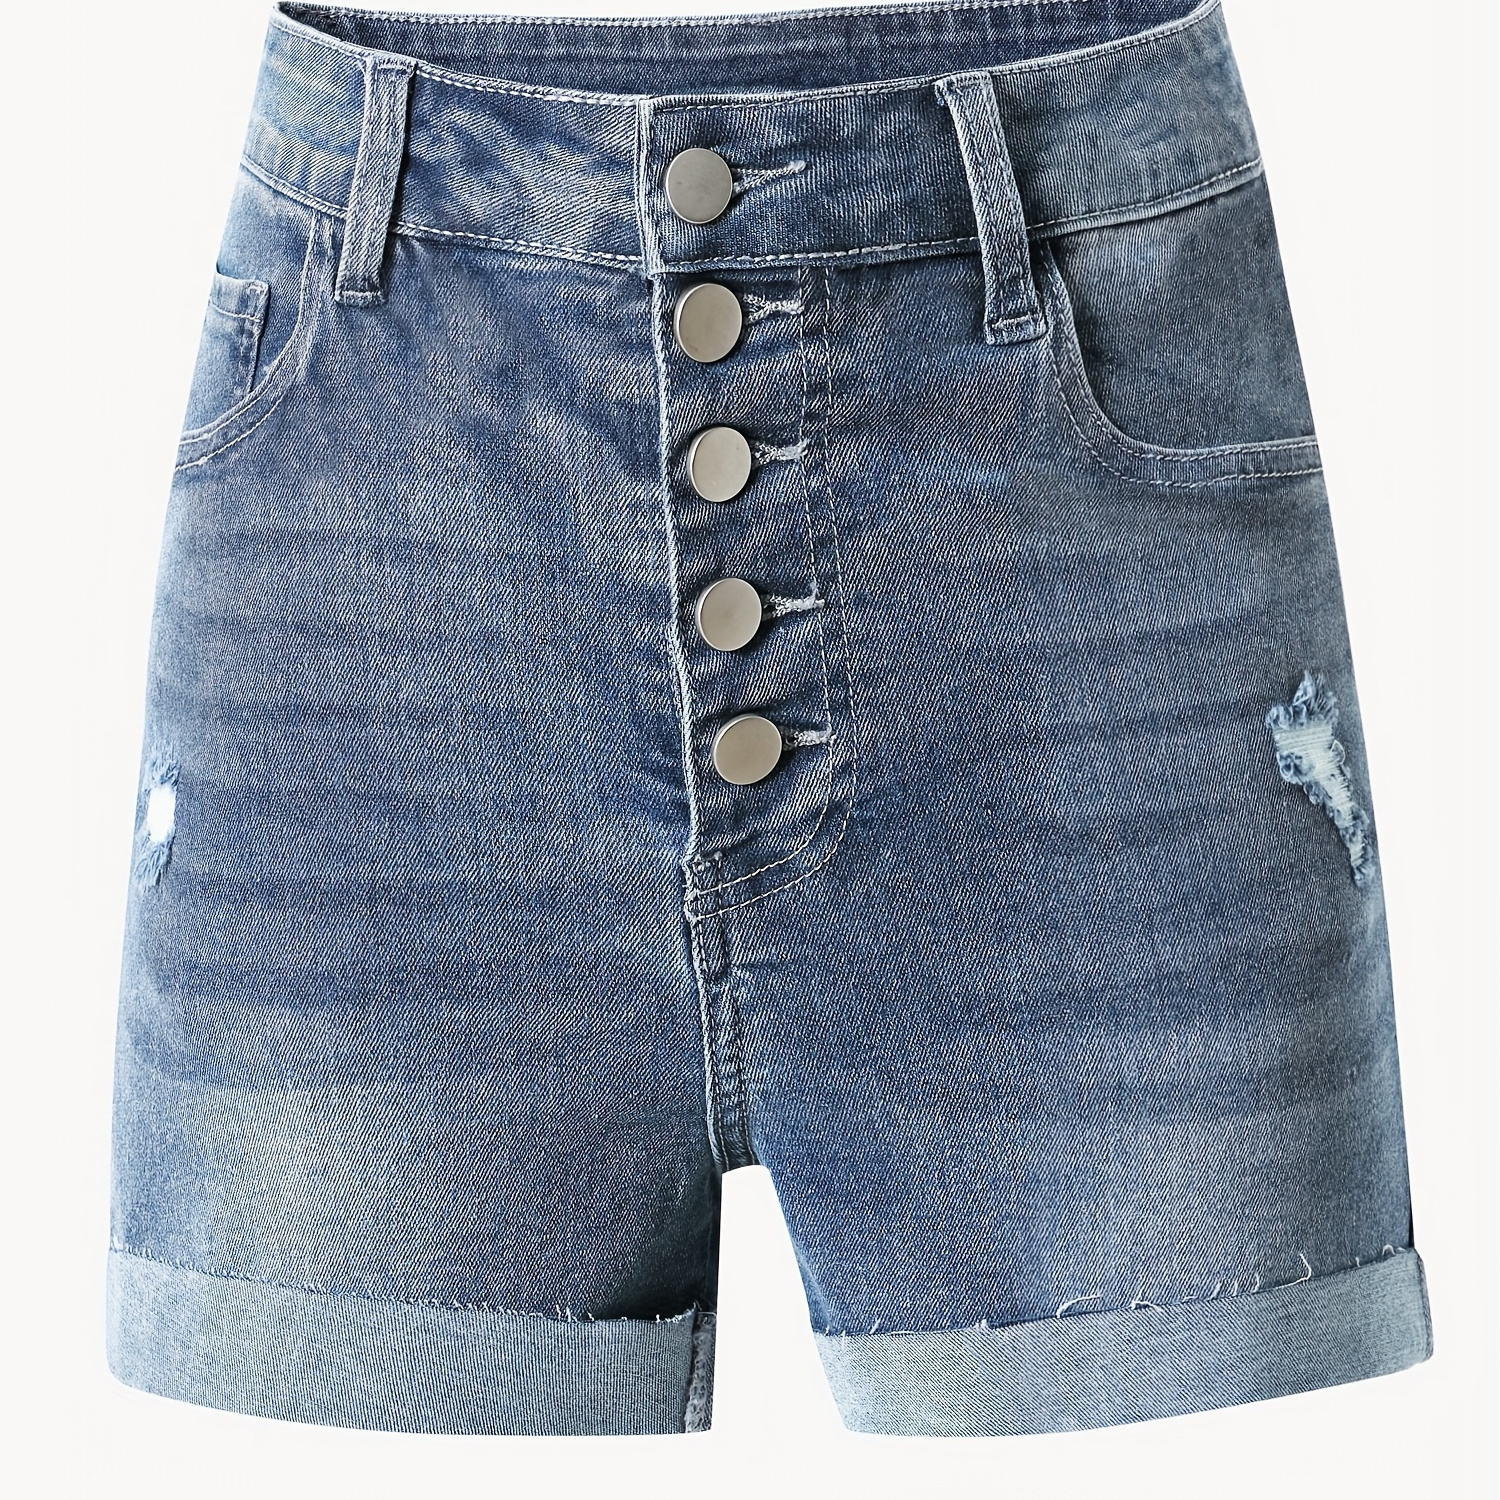 

Women's Casual High-waisted Button Fly Distressed Denim Shorts, Stretch Jean Shorts With Pockets